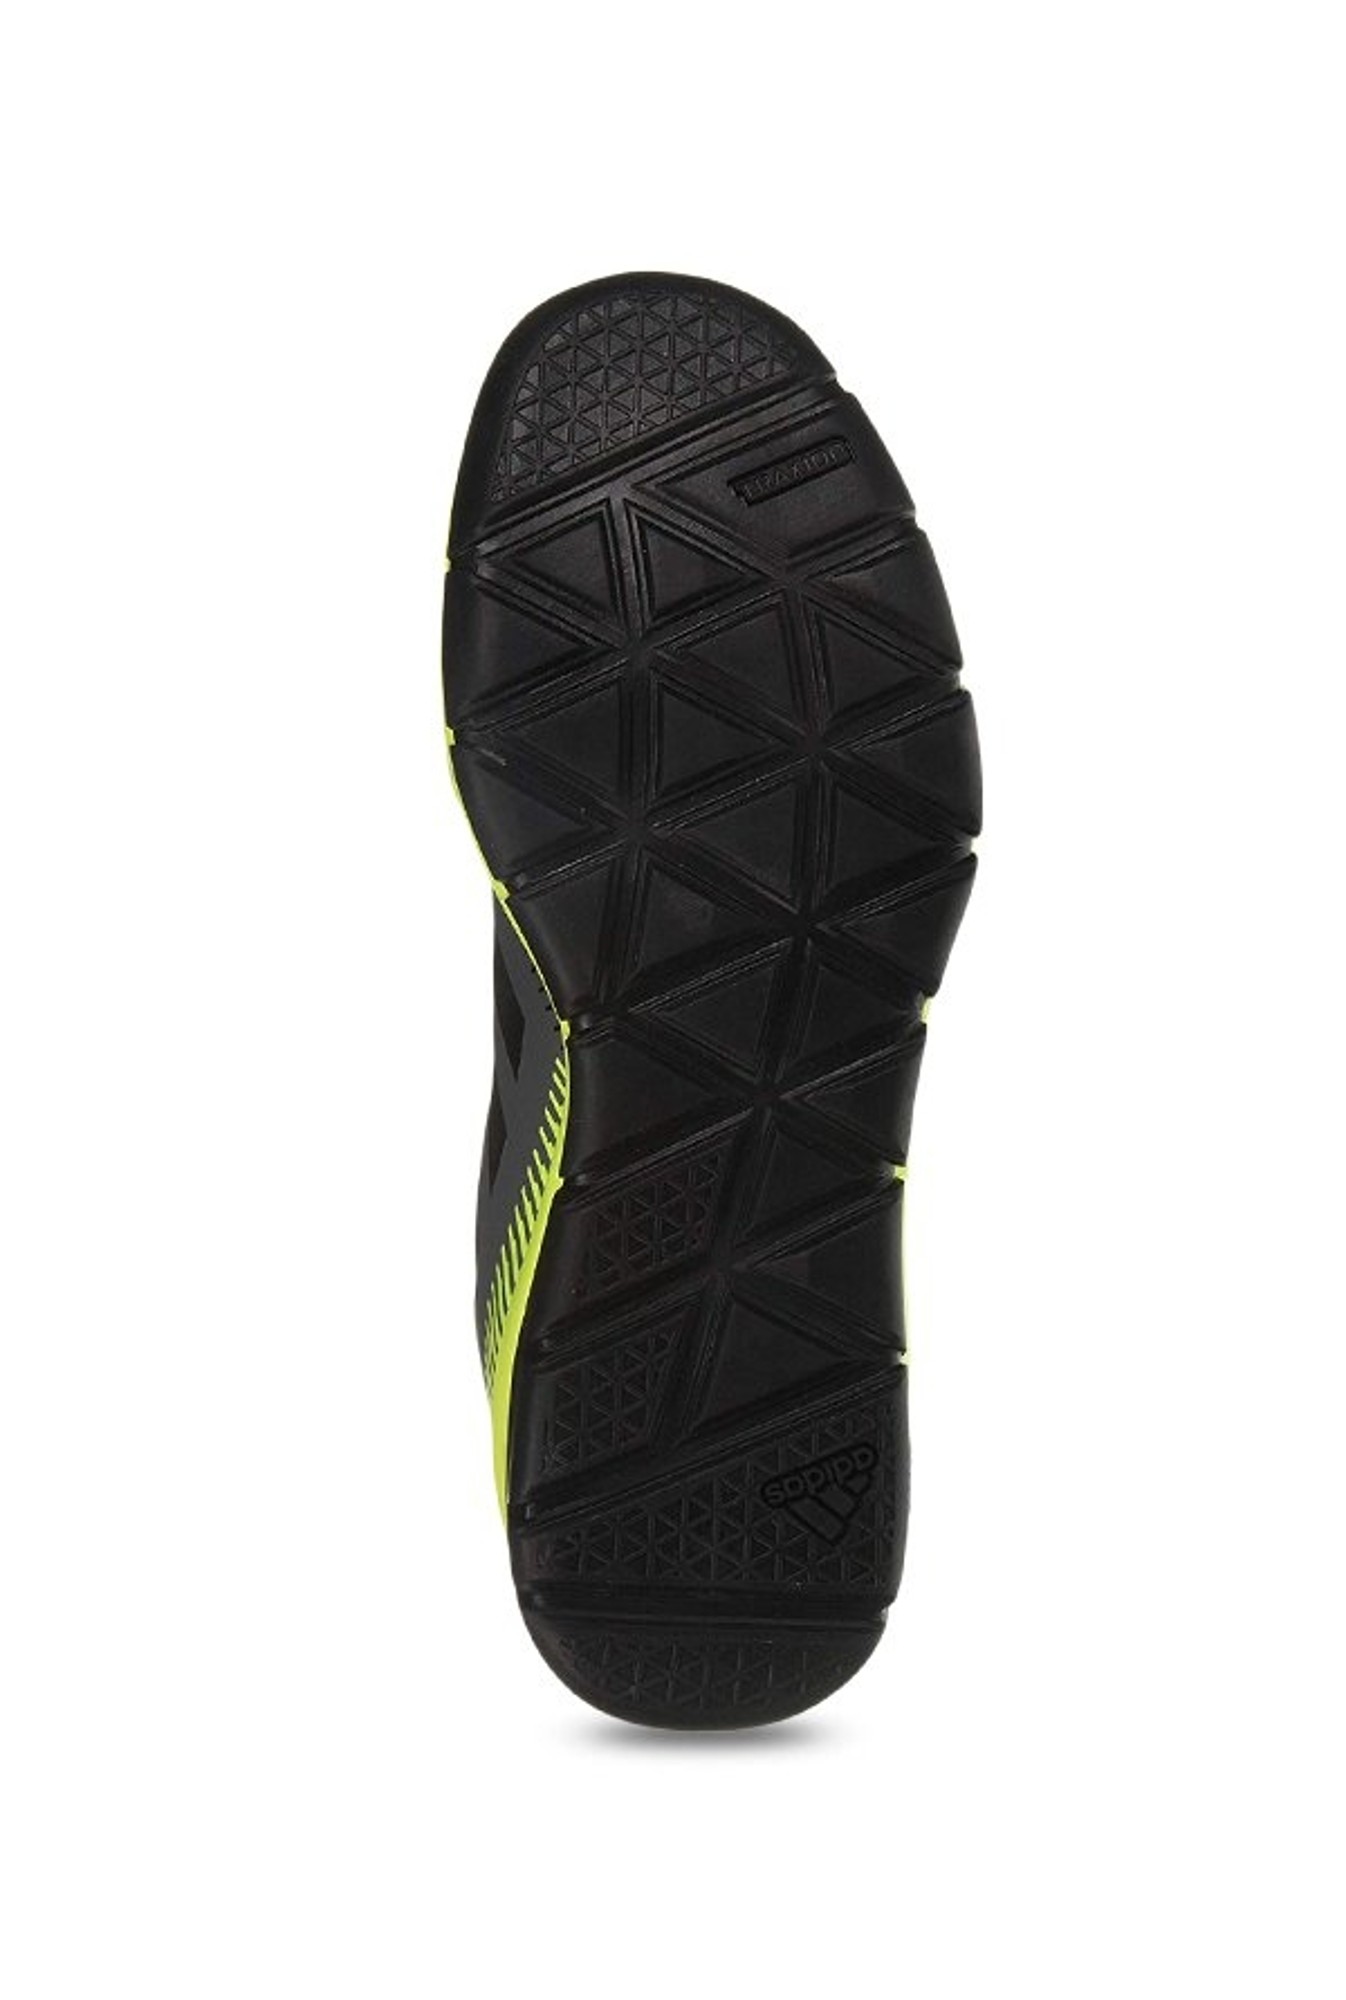 adidas tell path black outdoor shoes